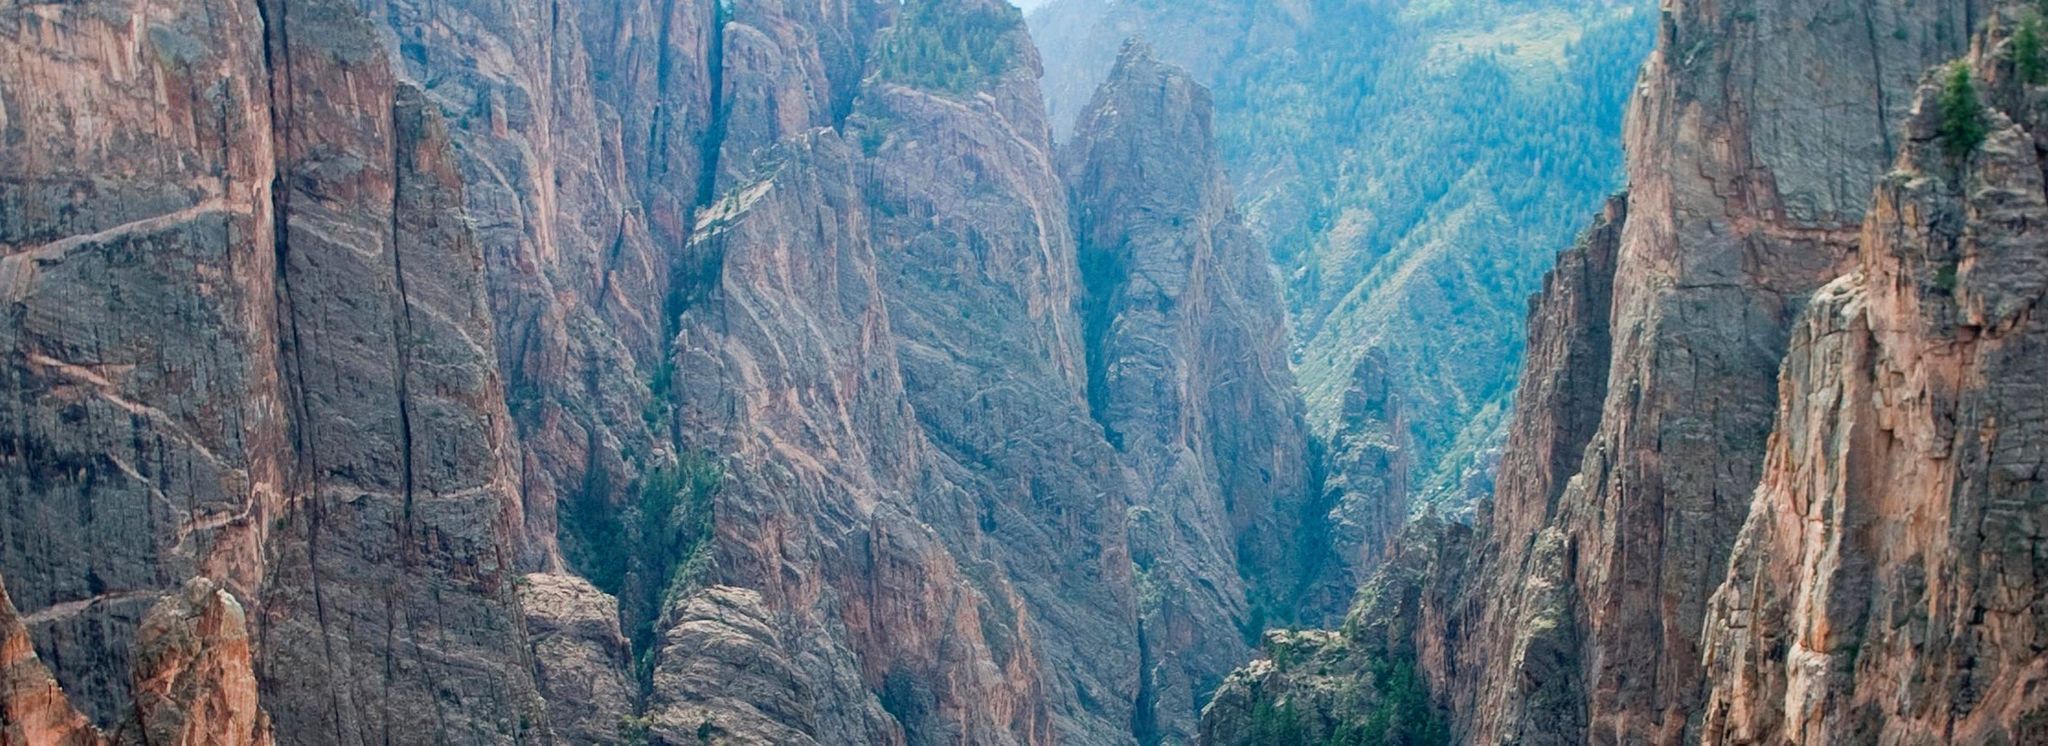 A photo of the Black Canyon of the Gunnison.